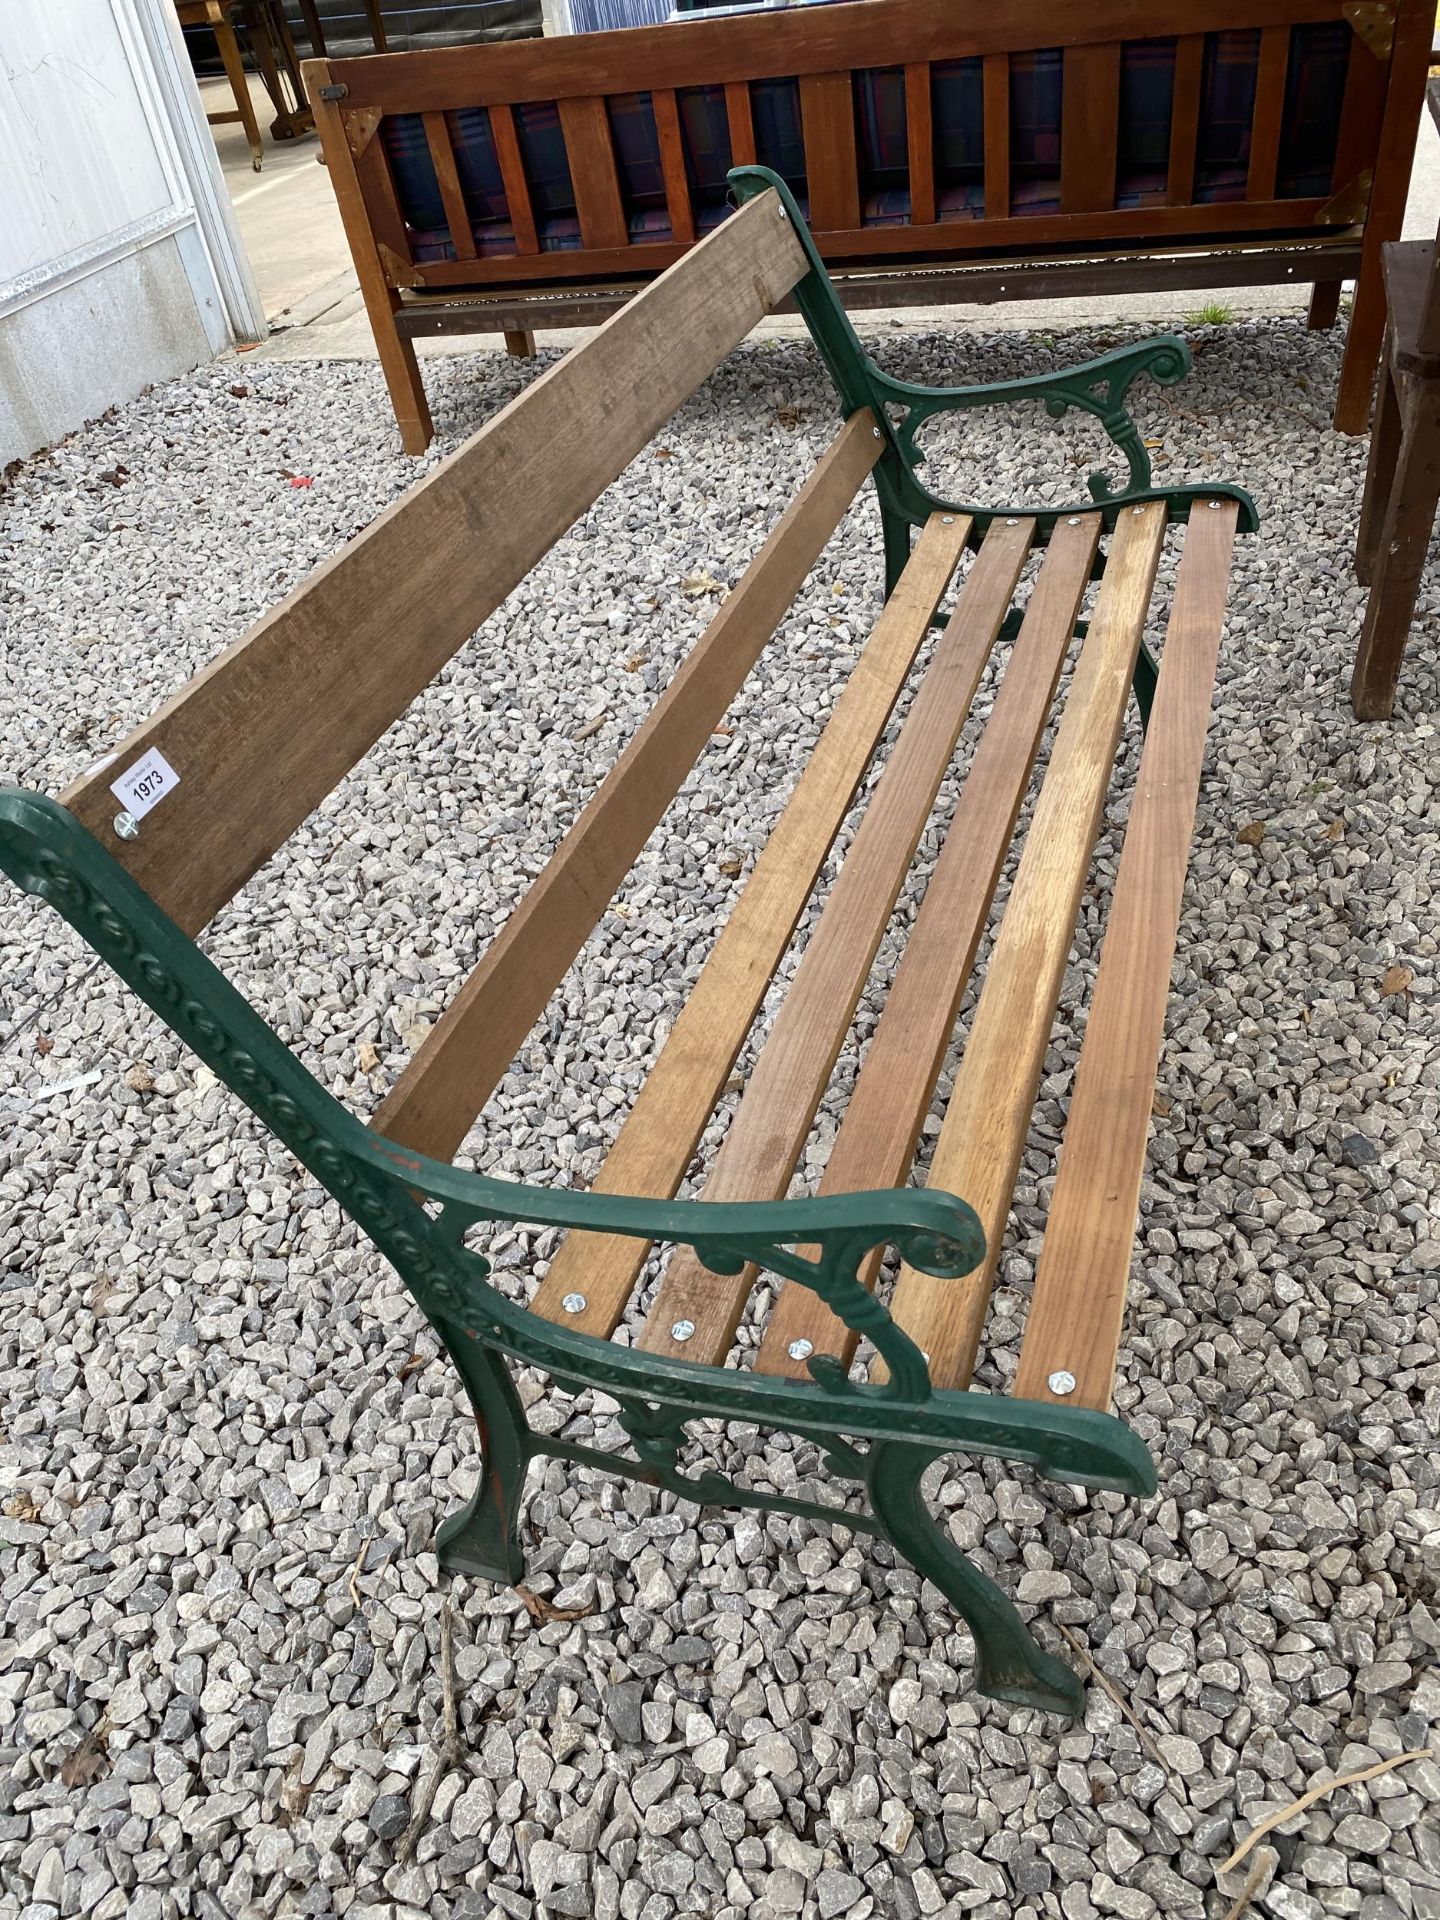 A WOODEN SLATTED GARDEN BENCH WITH CAST BENCH ENDS - Image 2 of 2